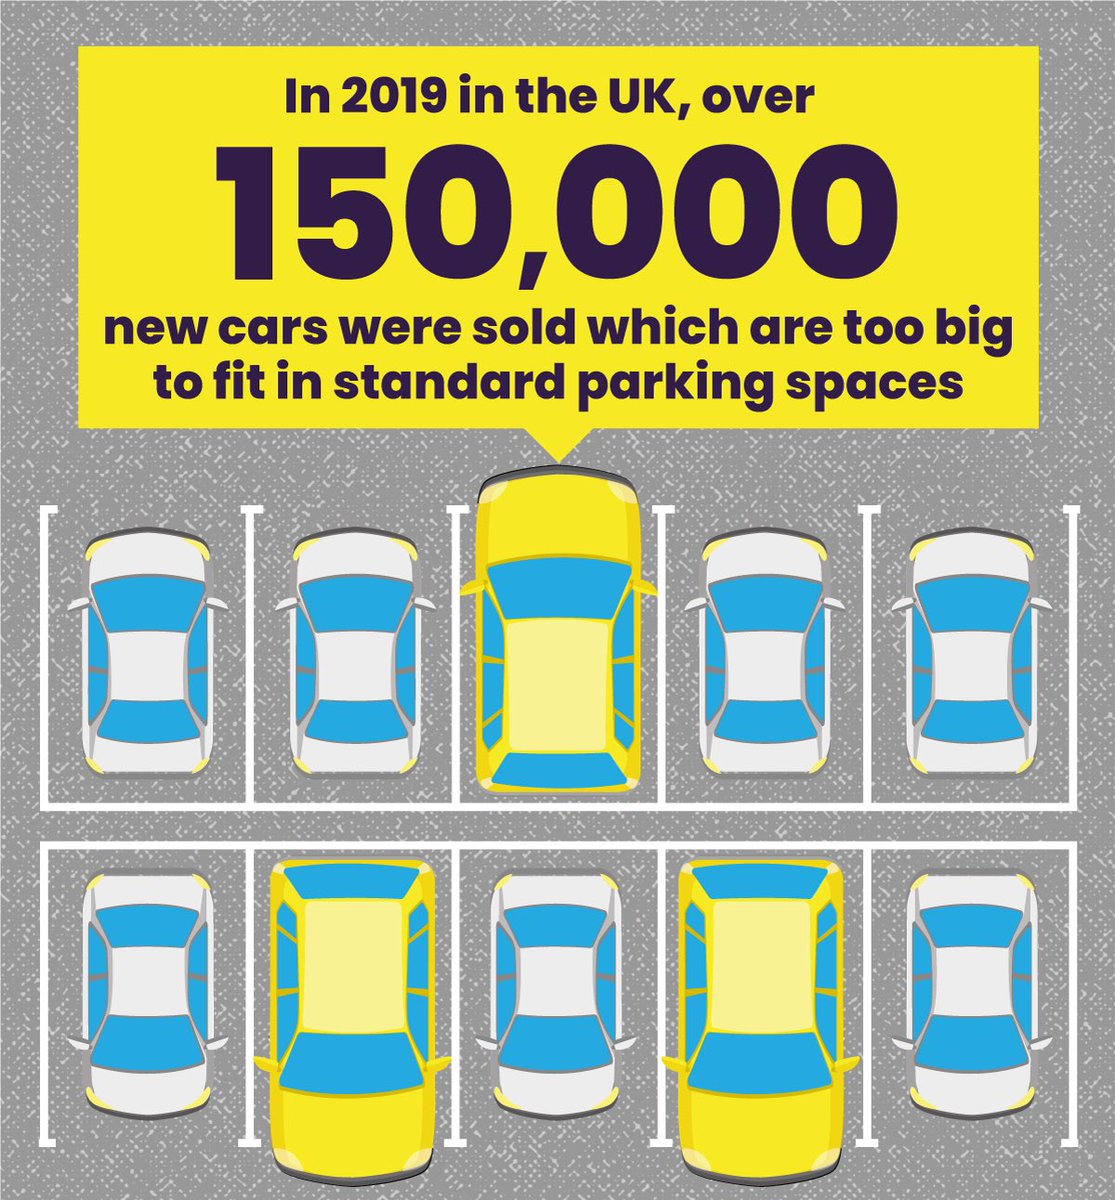 THEREFORE we propose an immediate end to advertising in all online, print, broadcast and out-of-home media of the ‘dirtiest third’ of new cars sold in the UK, as well as any cars which are too large to fit in a standard parking space - 150,000 of which hit UK streets in 2019. 21/